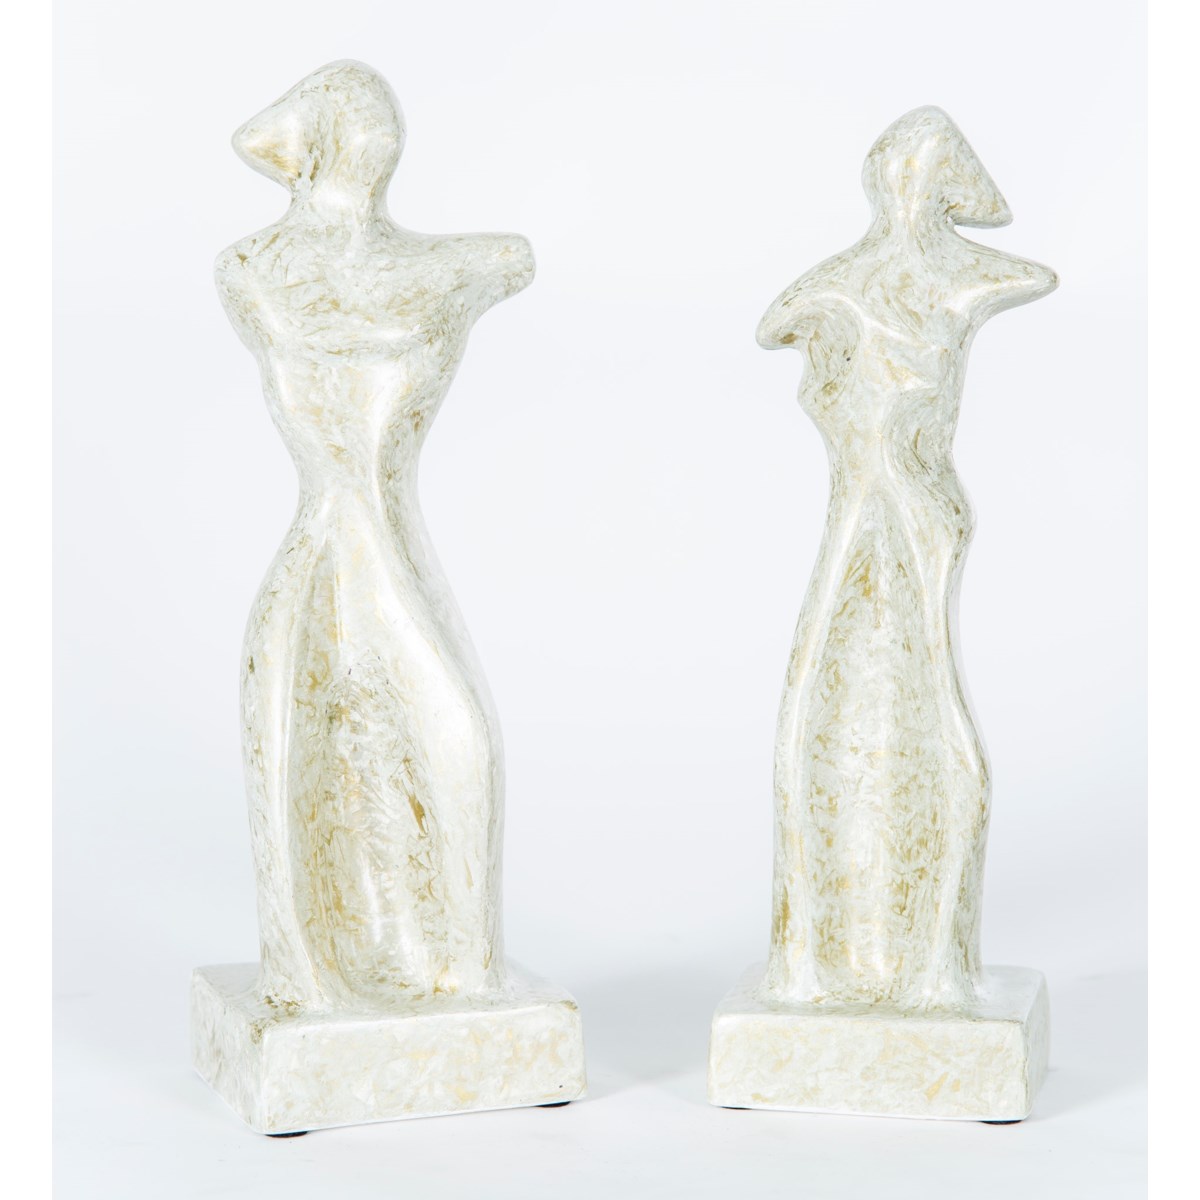 Abstract Lady Sculpture in Travertine Finish